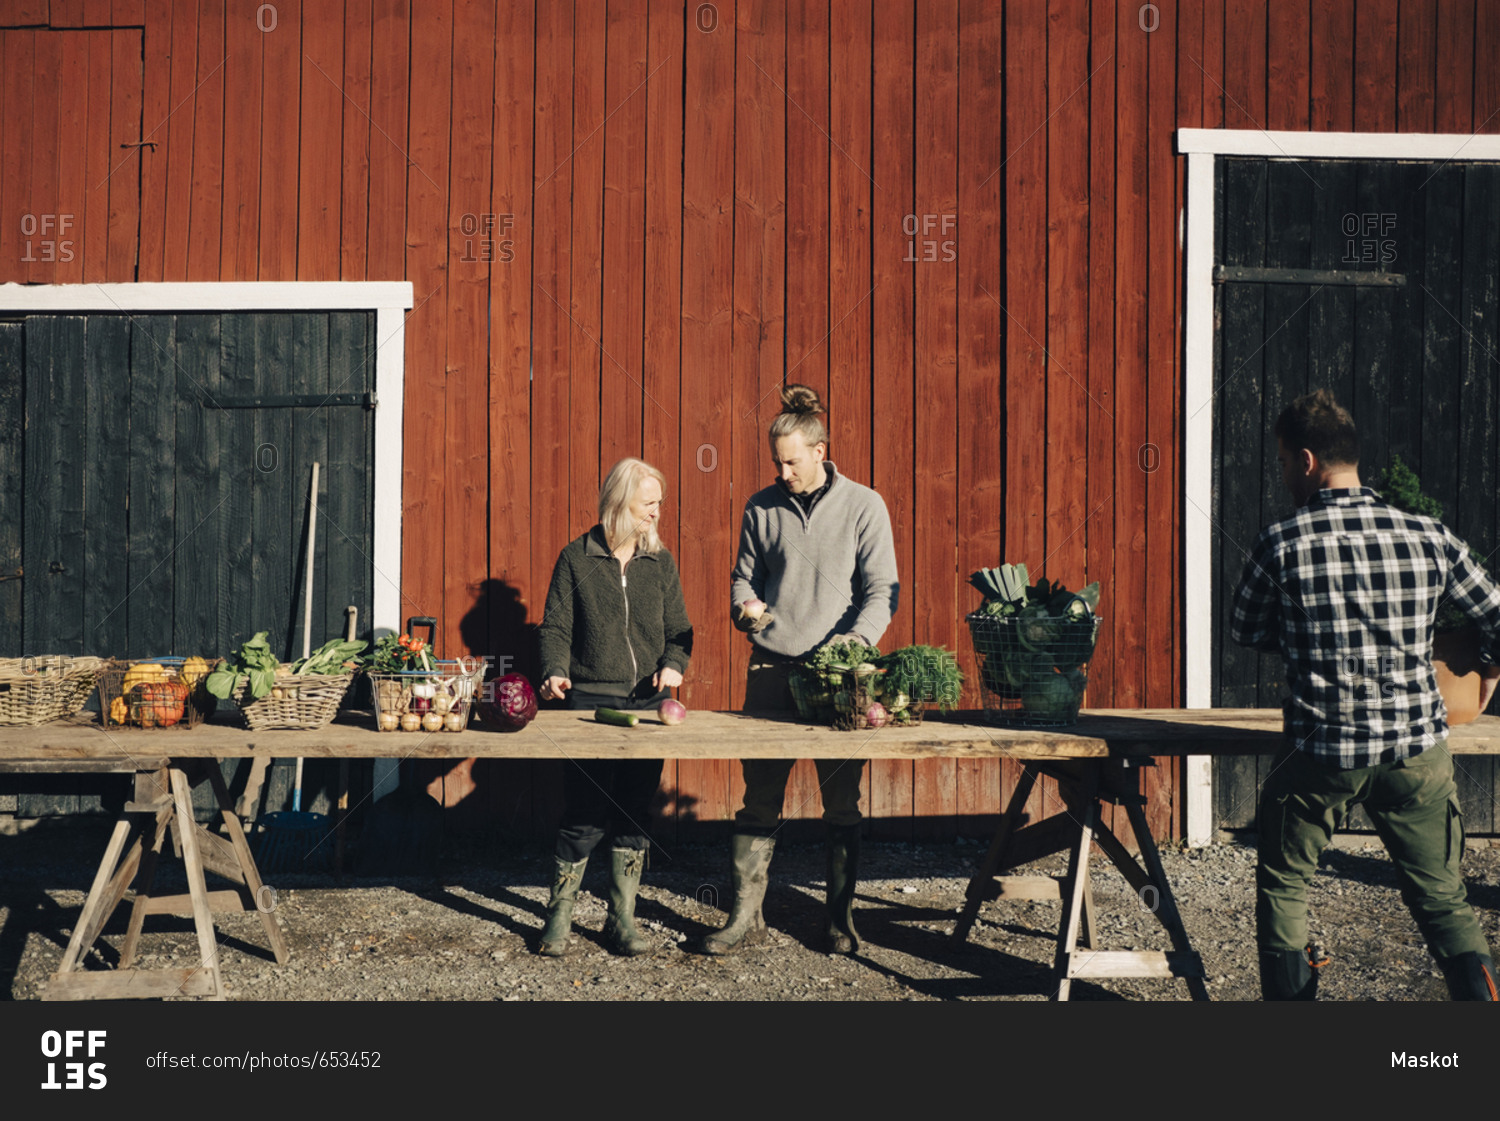 Male and female farmers arranging organic vegetables on table outside barn